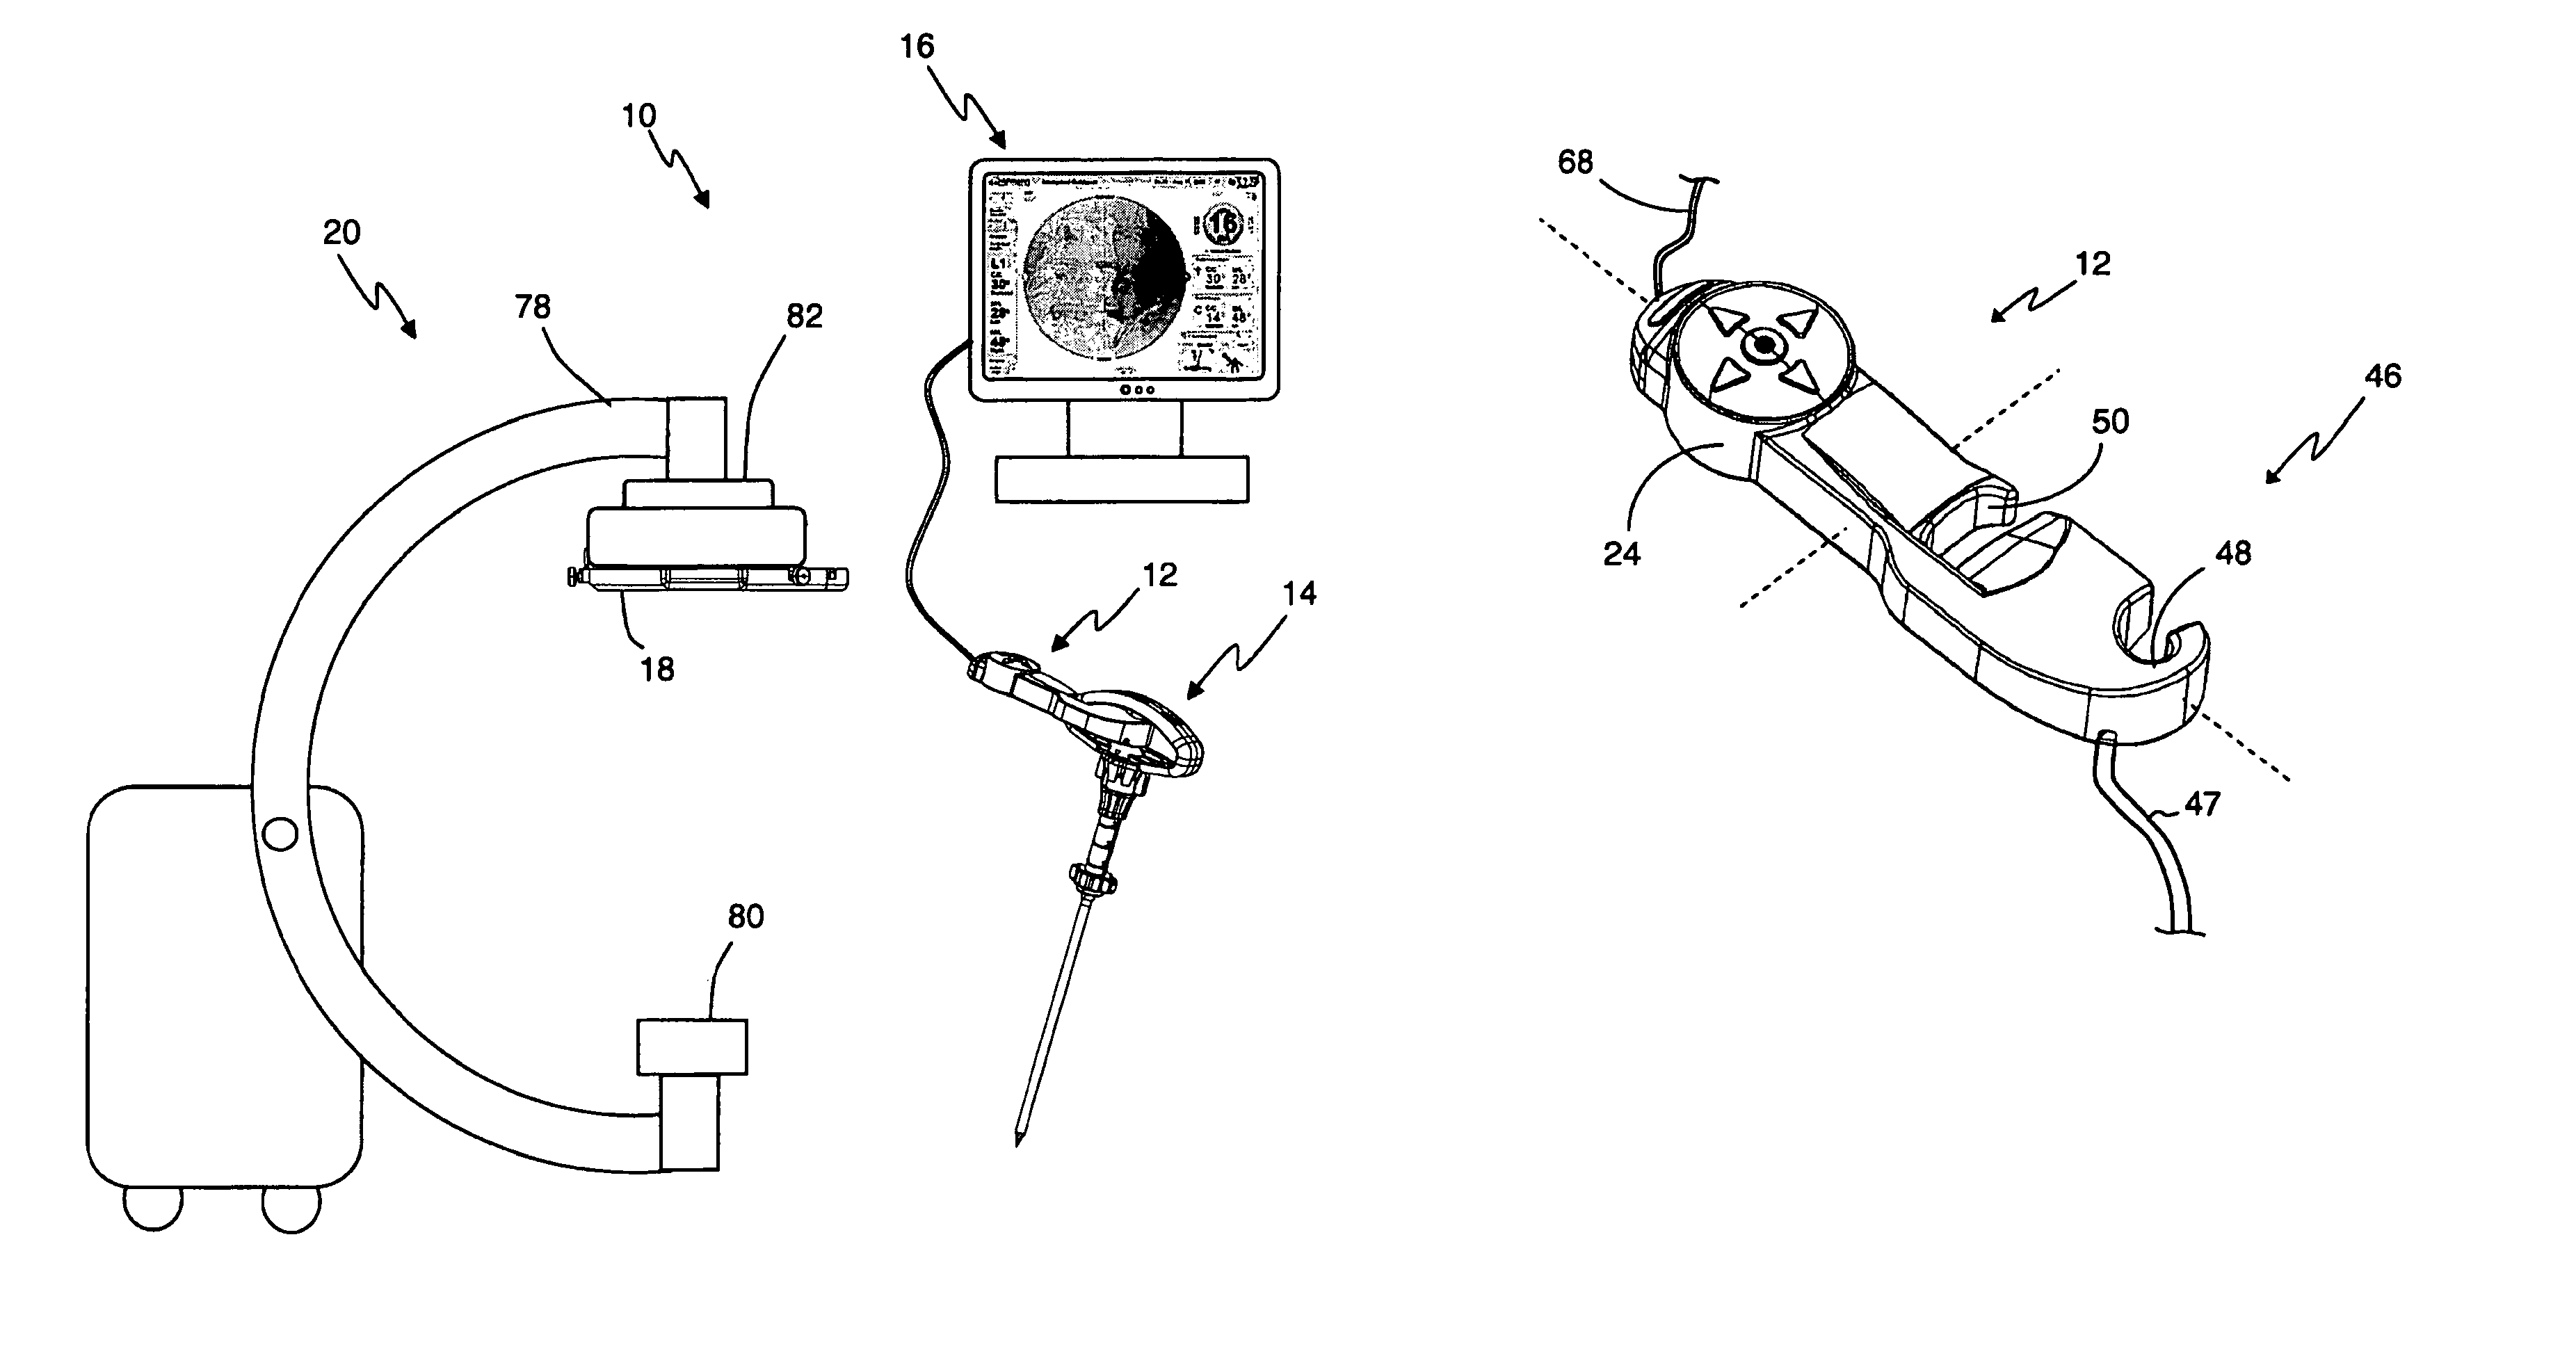 Monitoring trajectory of surgical instrument during the placement of a pedicle screw